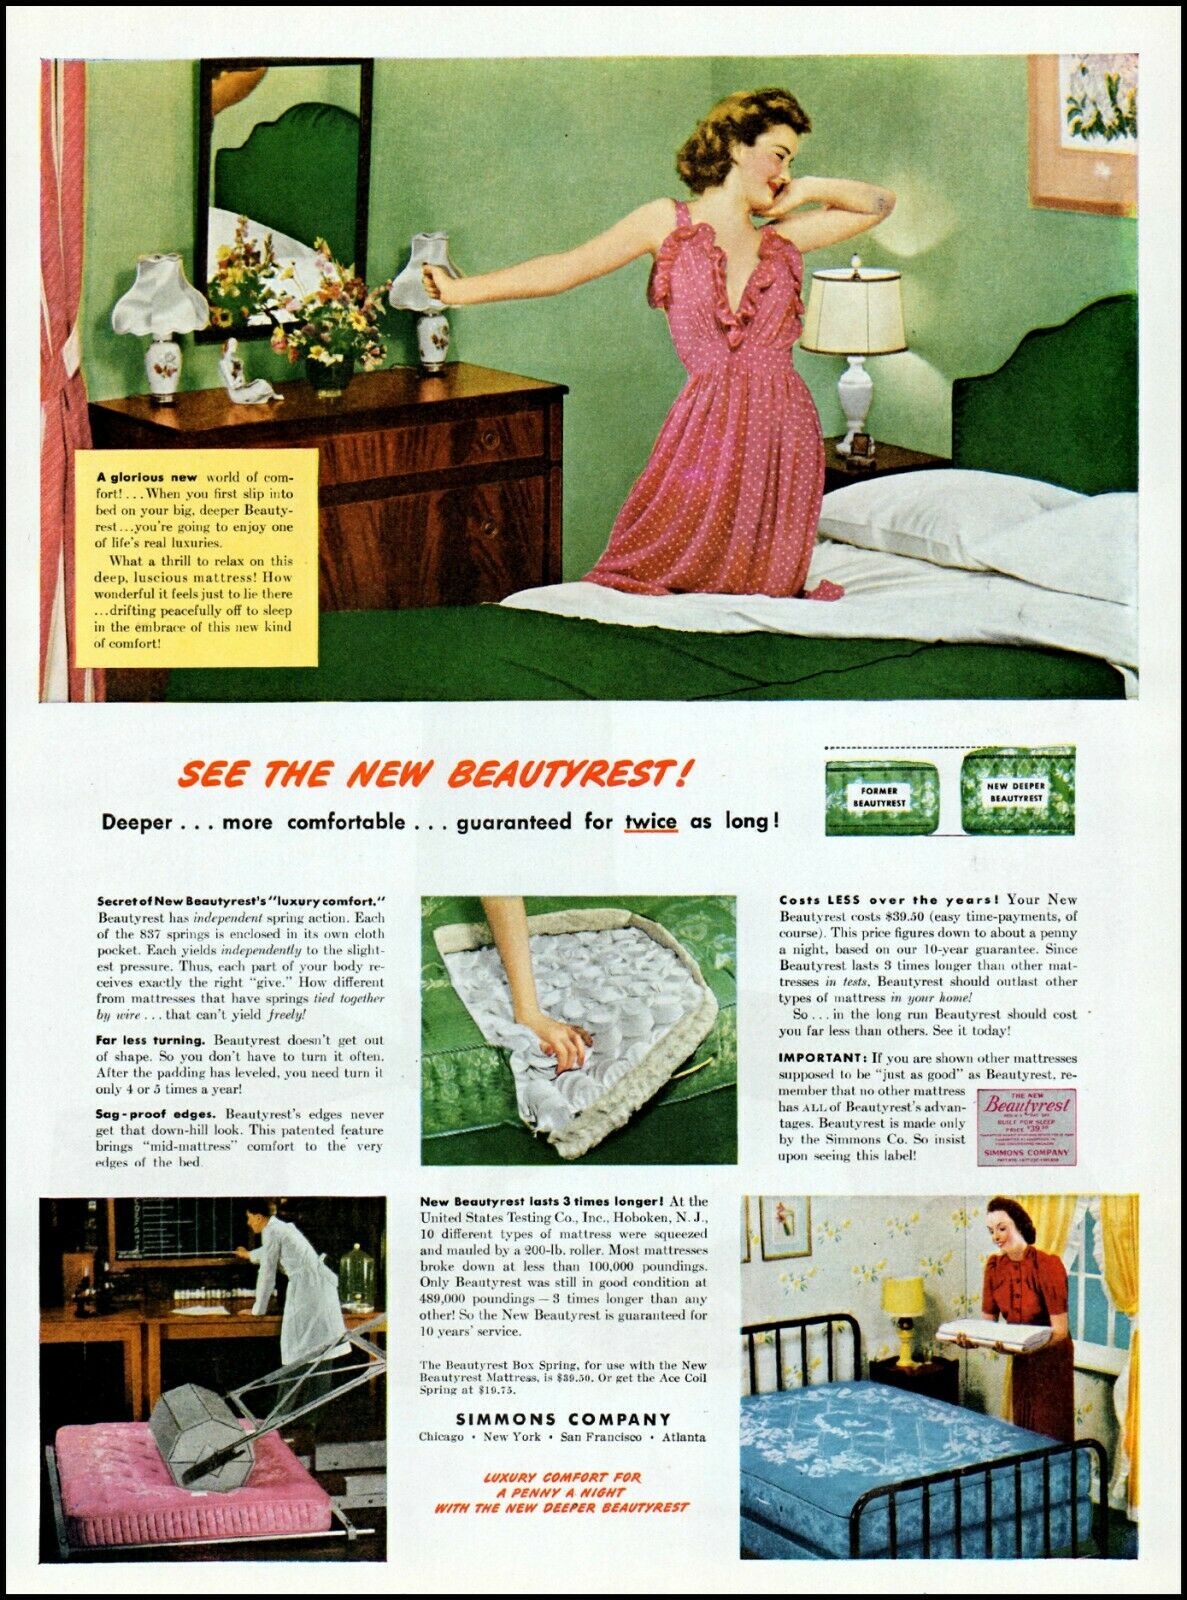 1939 Woman In Nightgown Simmons Beautyrest Mattress Vintage Photo Print Ad Adl70